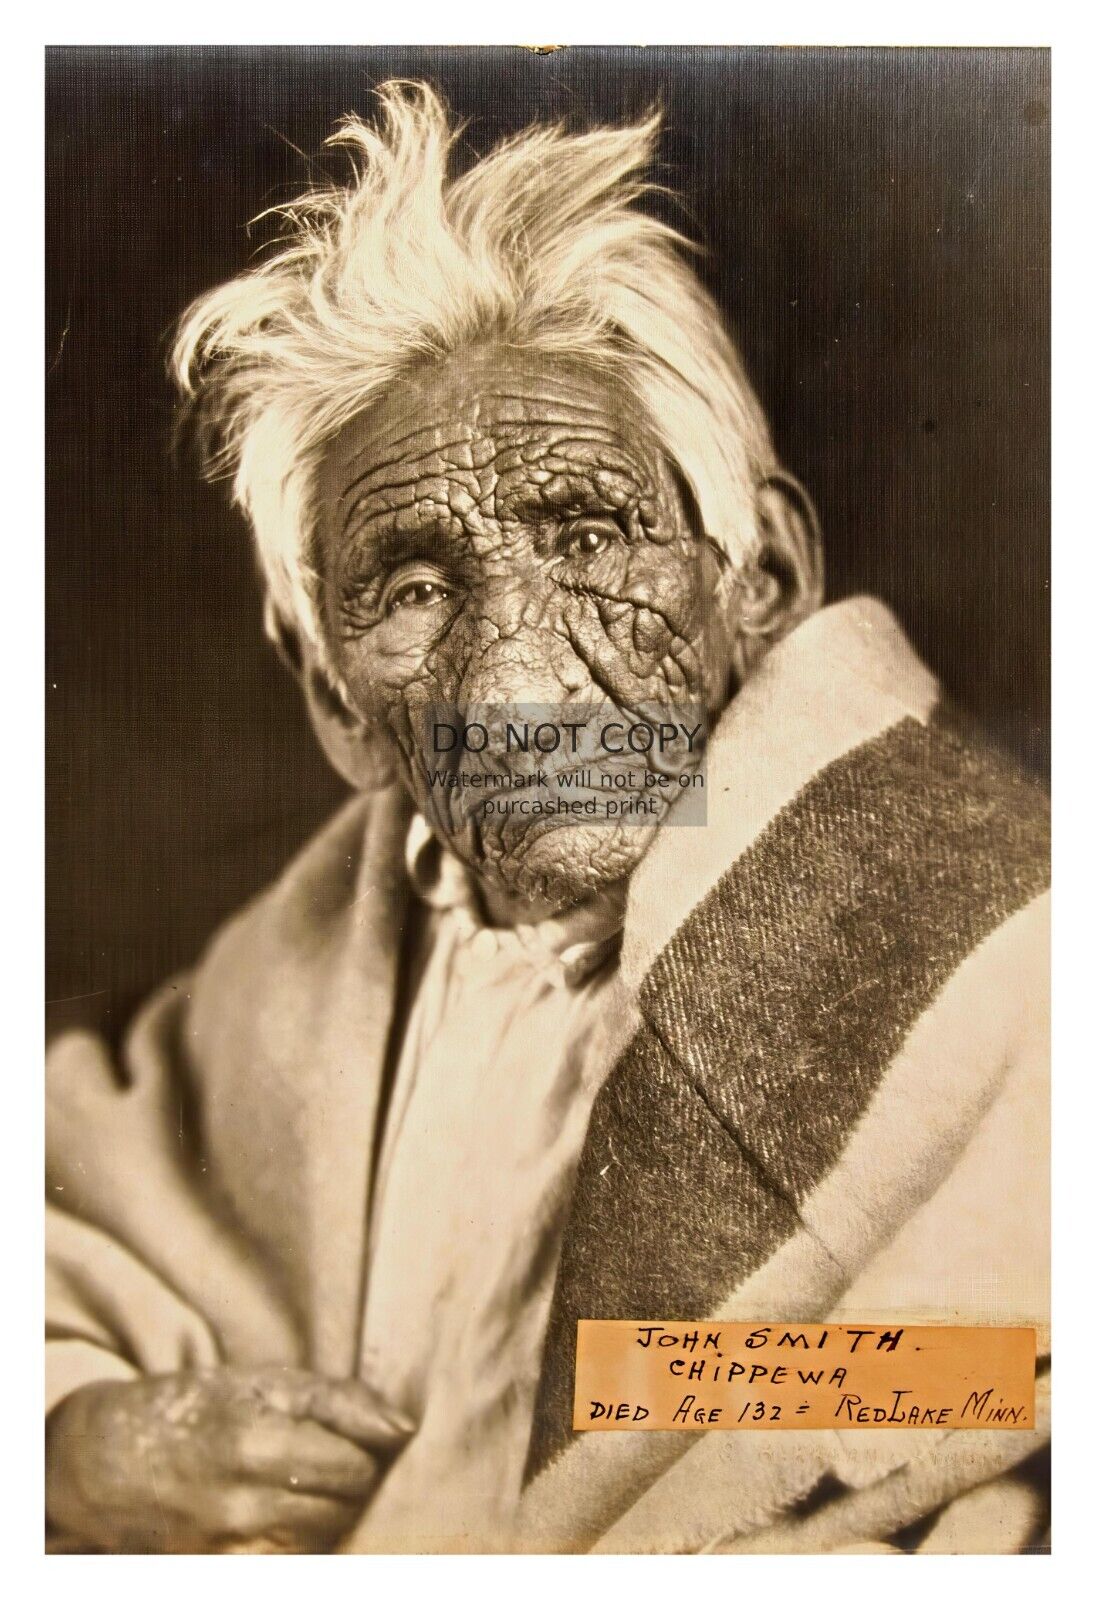 CHIEF JOHN SMITH CHIPPEWA NATIVE AMERICAN ELDER DIED AT 132 YEARS OLD 4X6 PHOTO